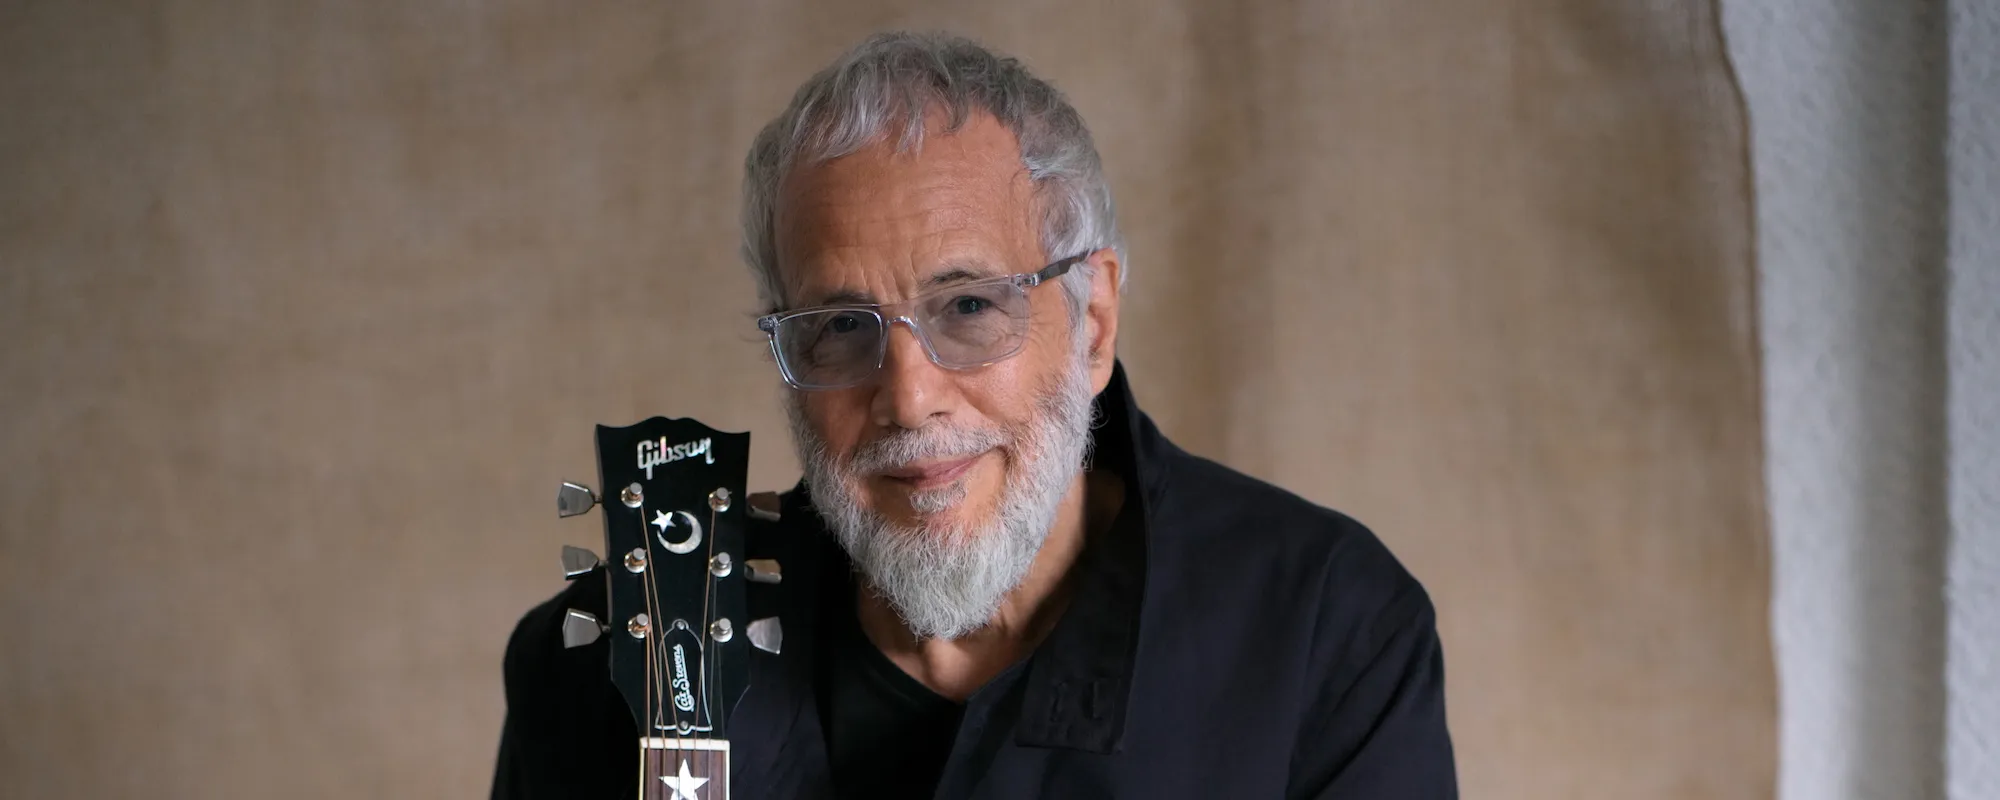 Cat Stevens Shares Worldly “All Nights, All Days,” From Upcoming Album ‘King of a Land’